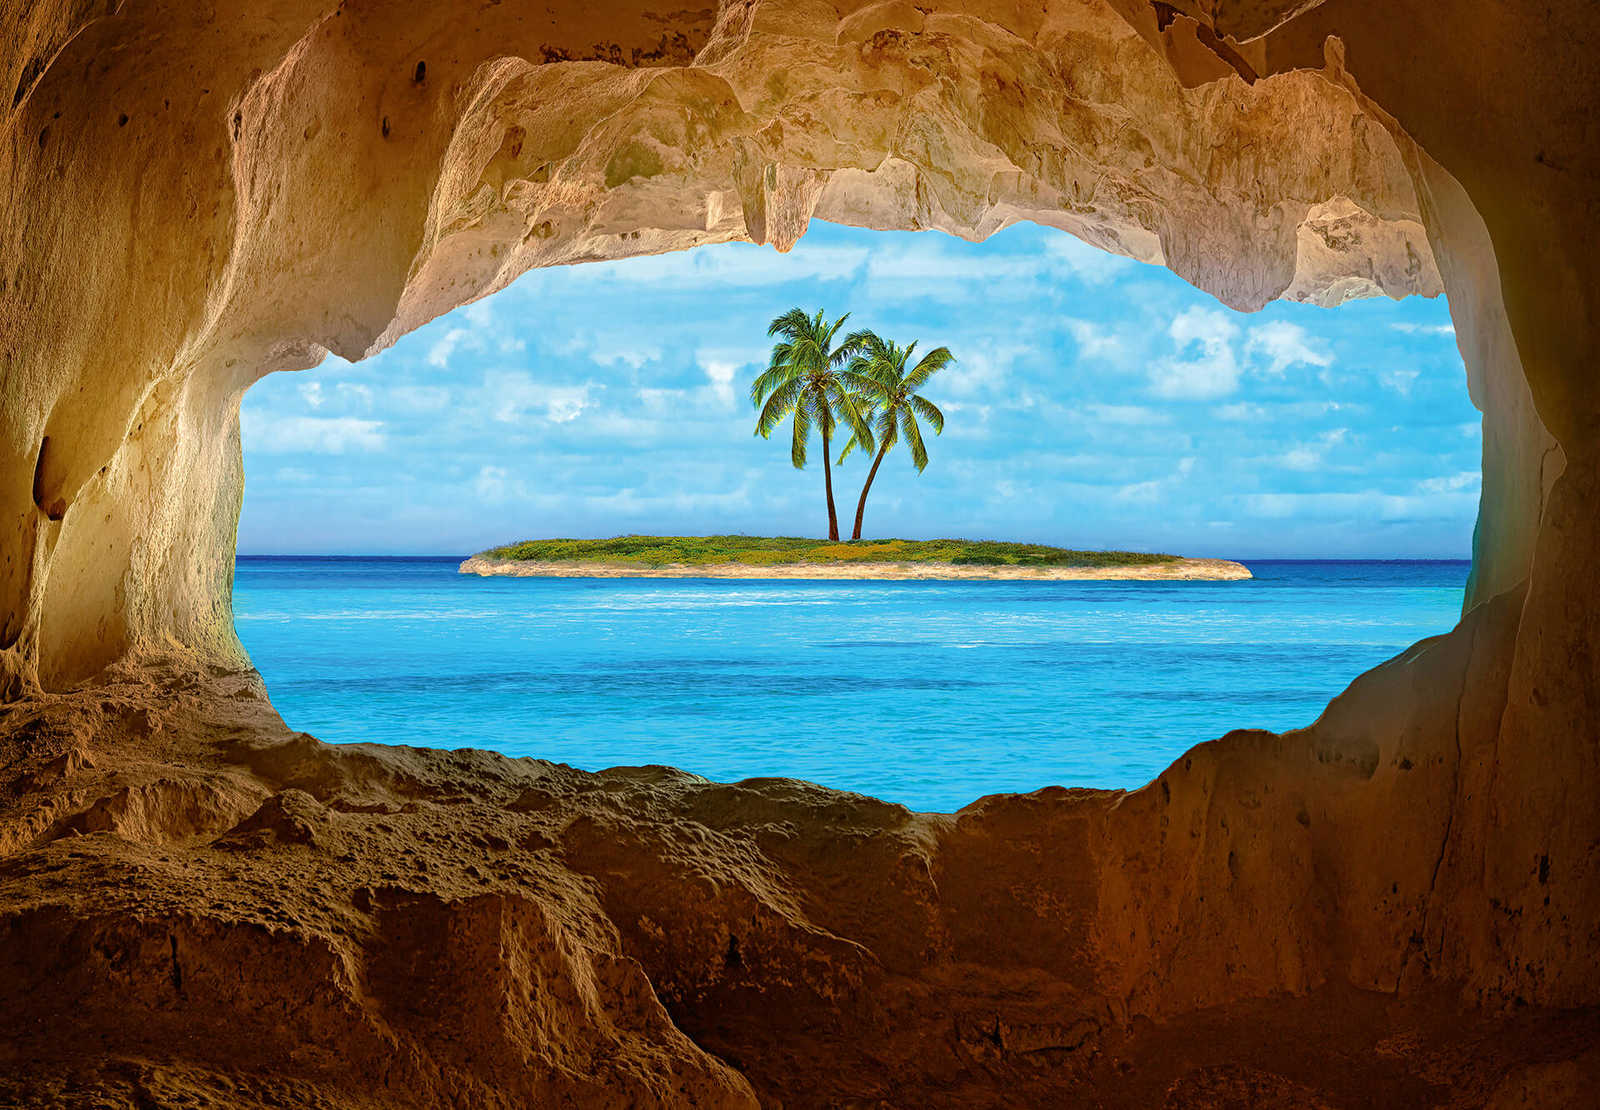 South Seas mural natural stone cave with sea view
